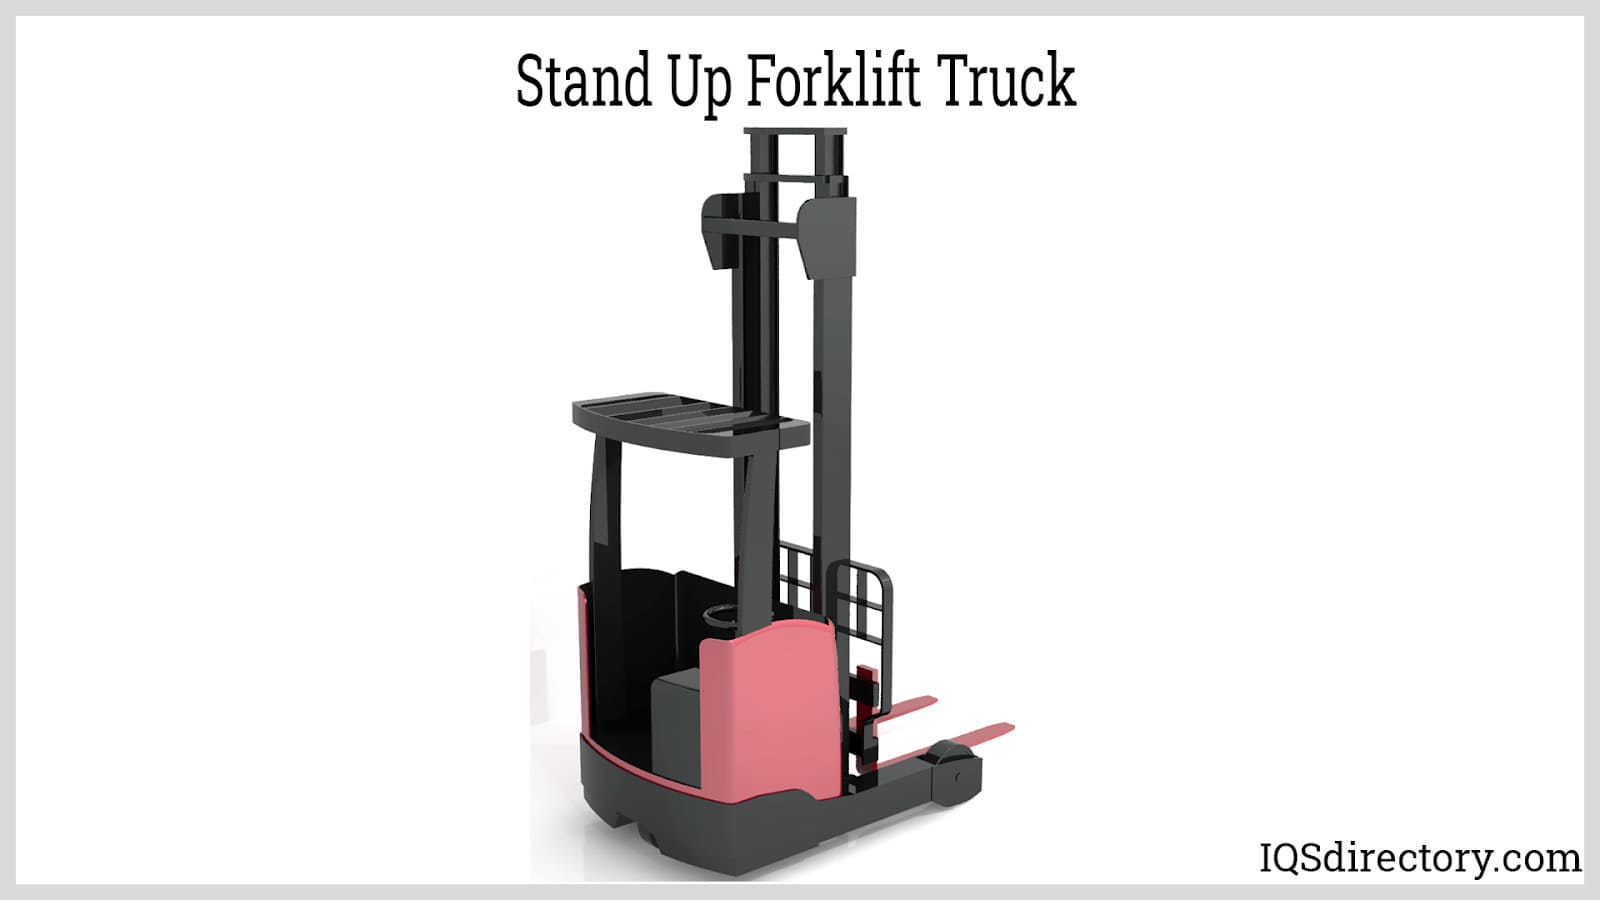 Stand Up Forklift Truck